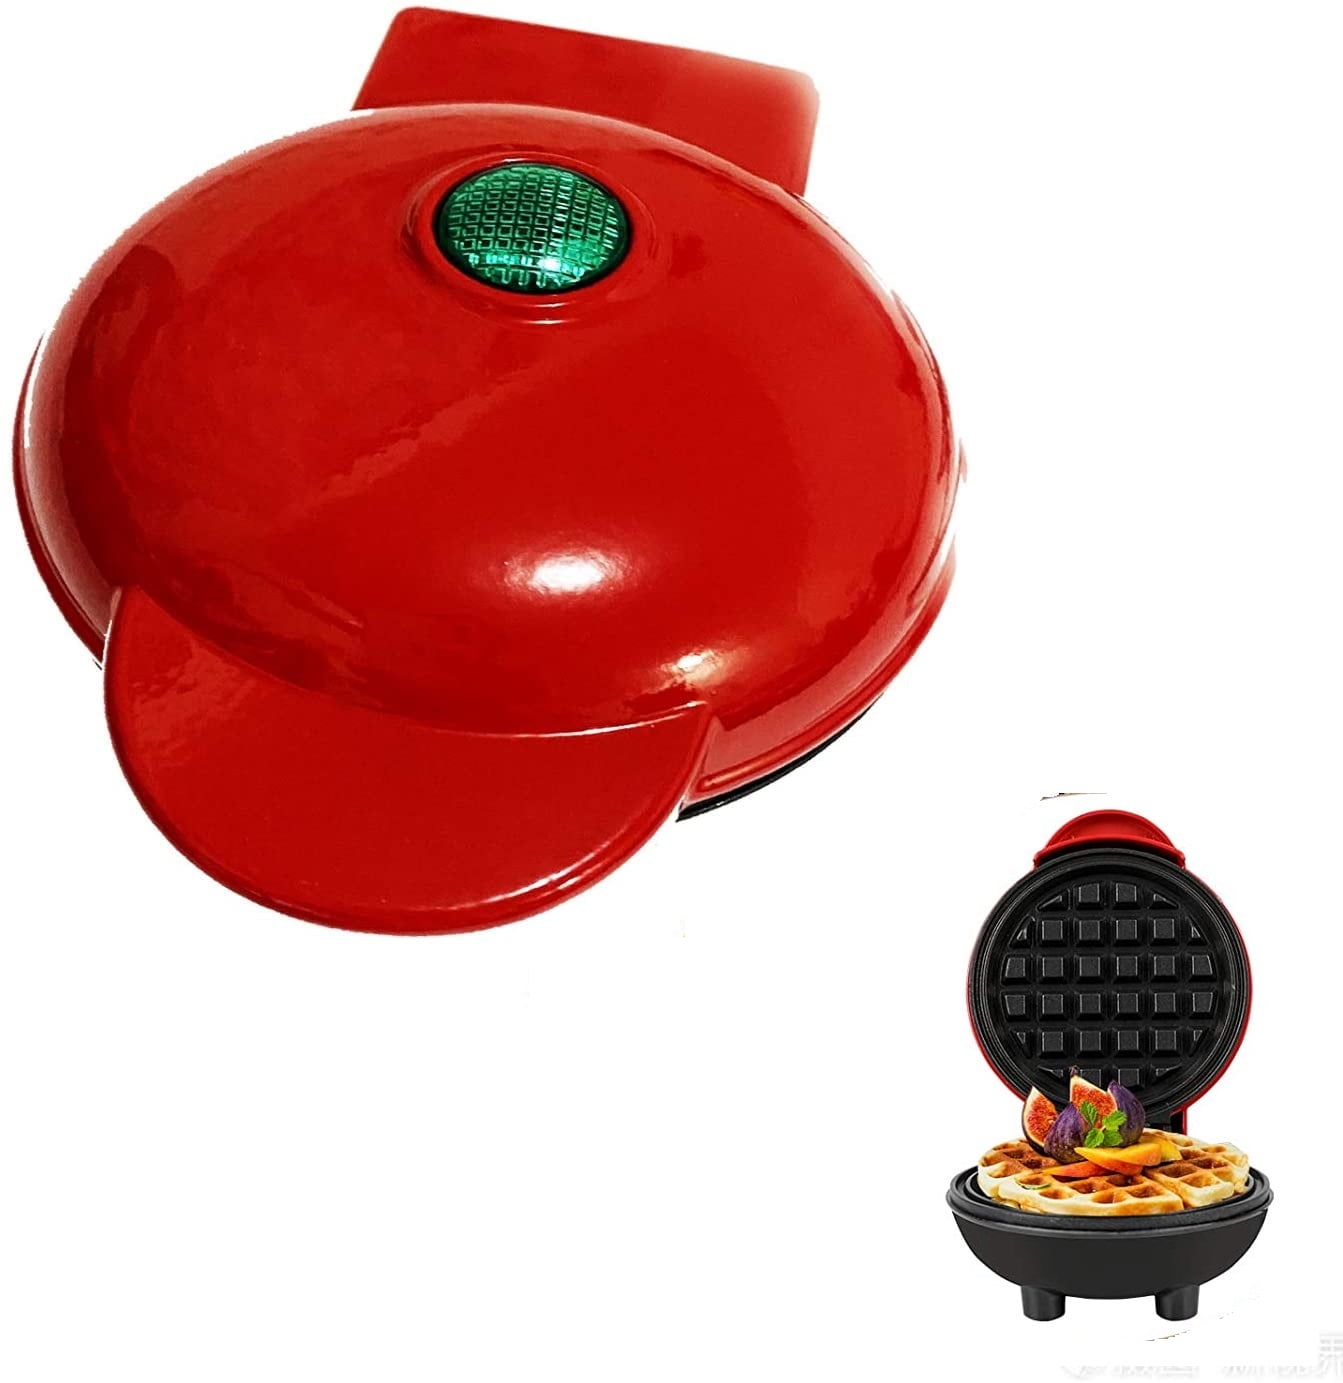 Dash Mini Pancake/Egg Maker 350W Non-Stick Electric Red Tested And